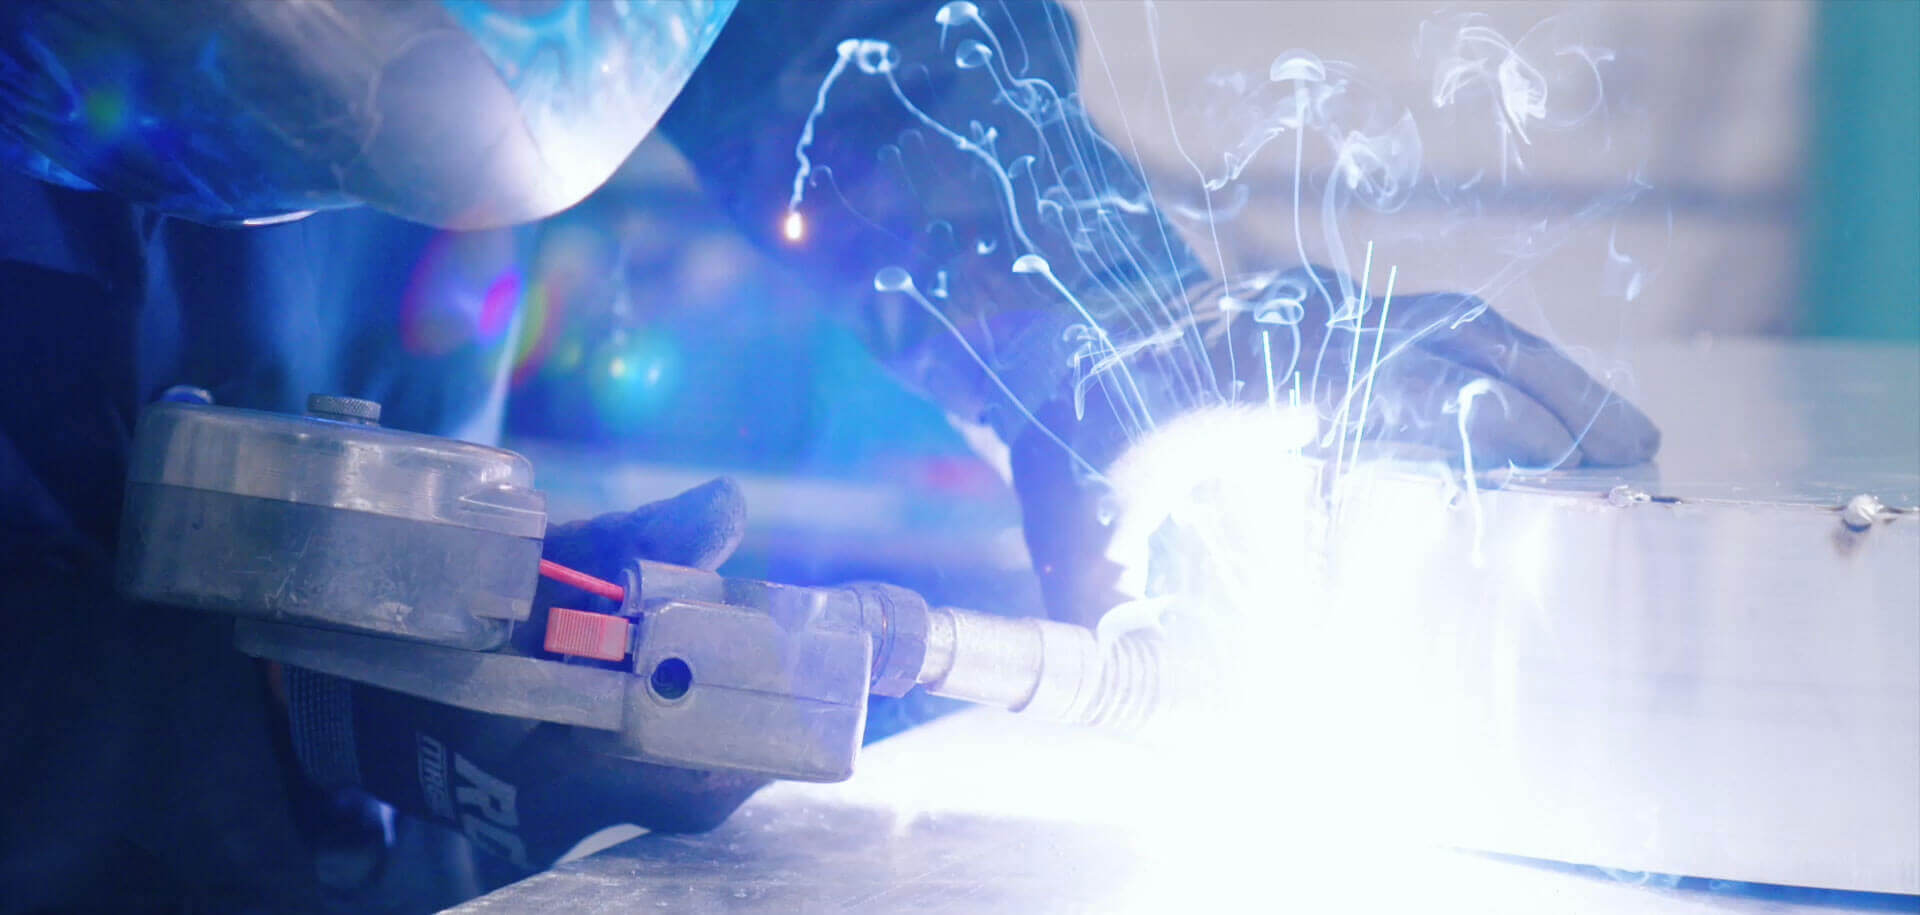 Welder welding metal pieces together with sparks flying